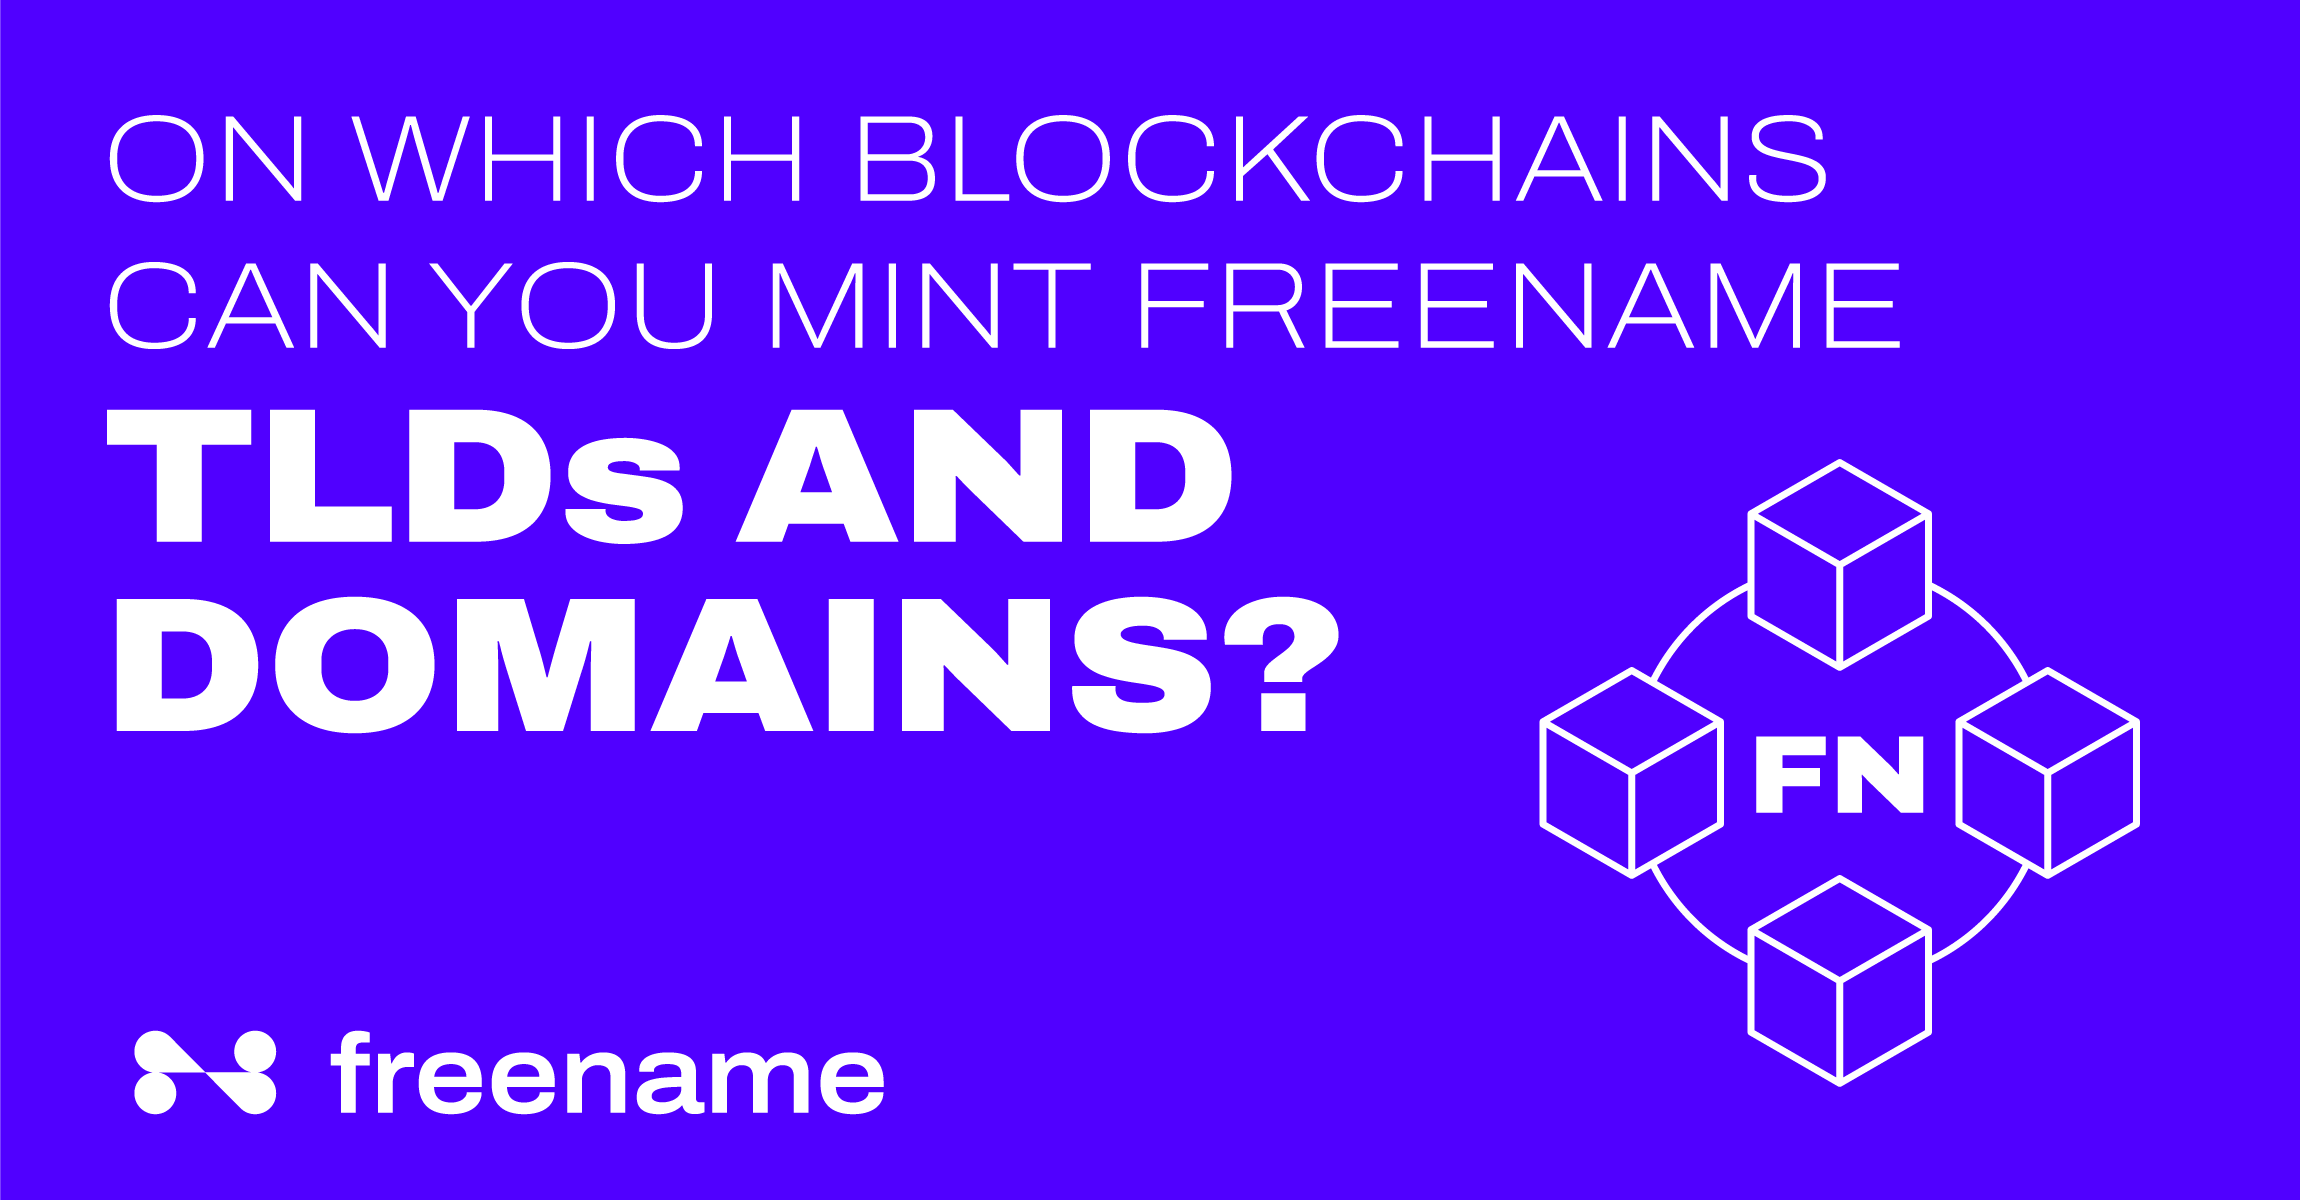 On which blockchains can you mint Freename TLDs and domains?